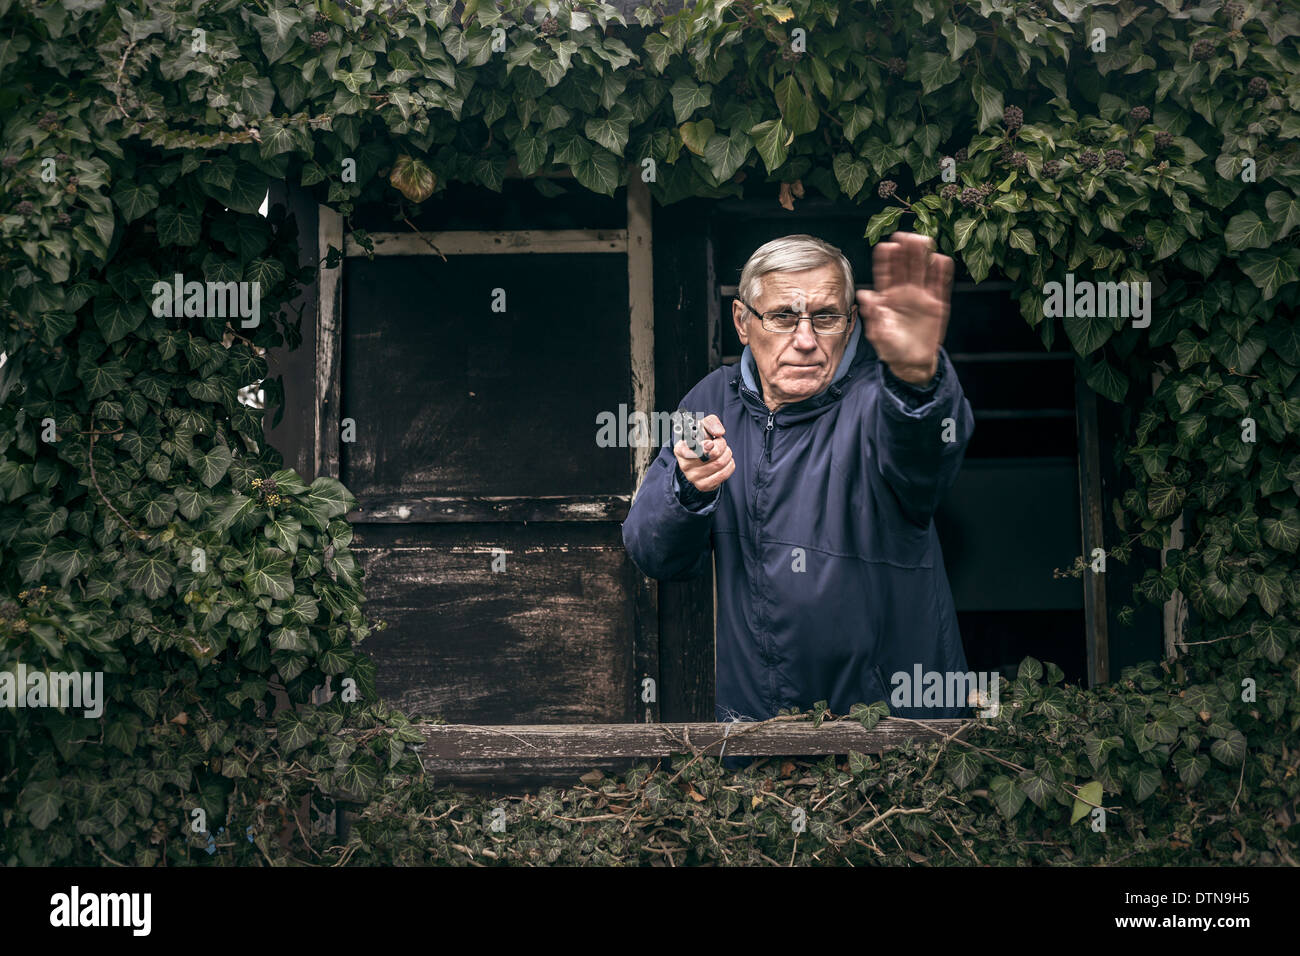 Furious senior man gesturing with a gun protecting his property, standing in front of old overgrown cabin. Stock Photo